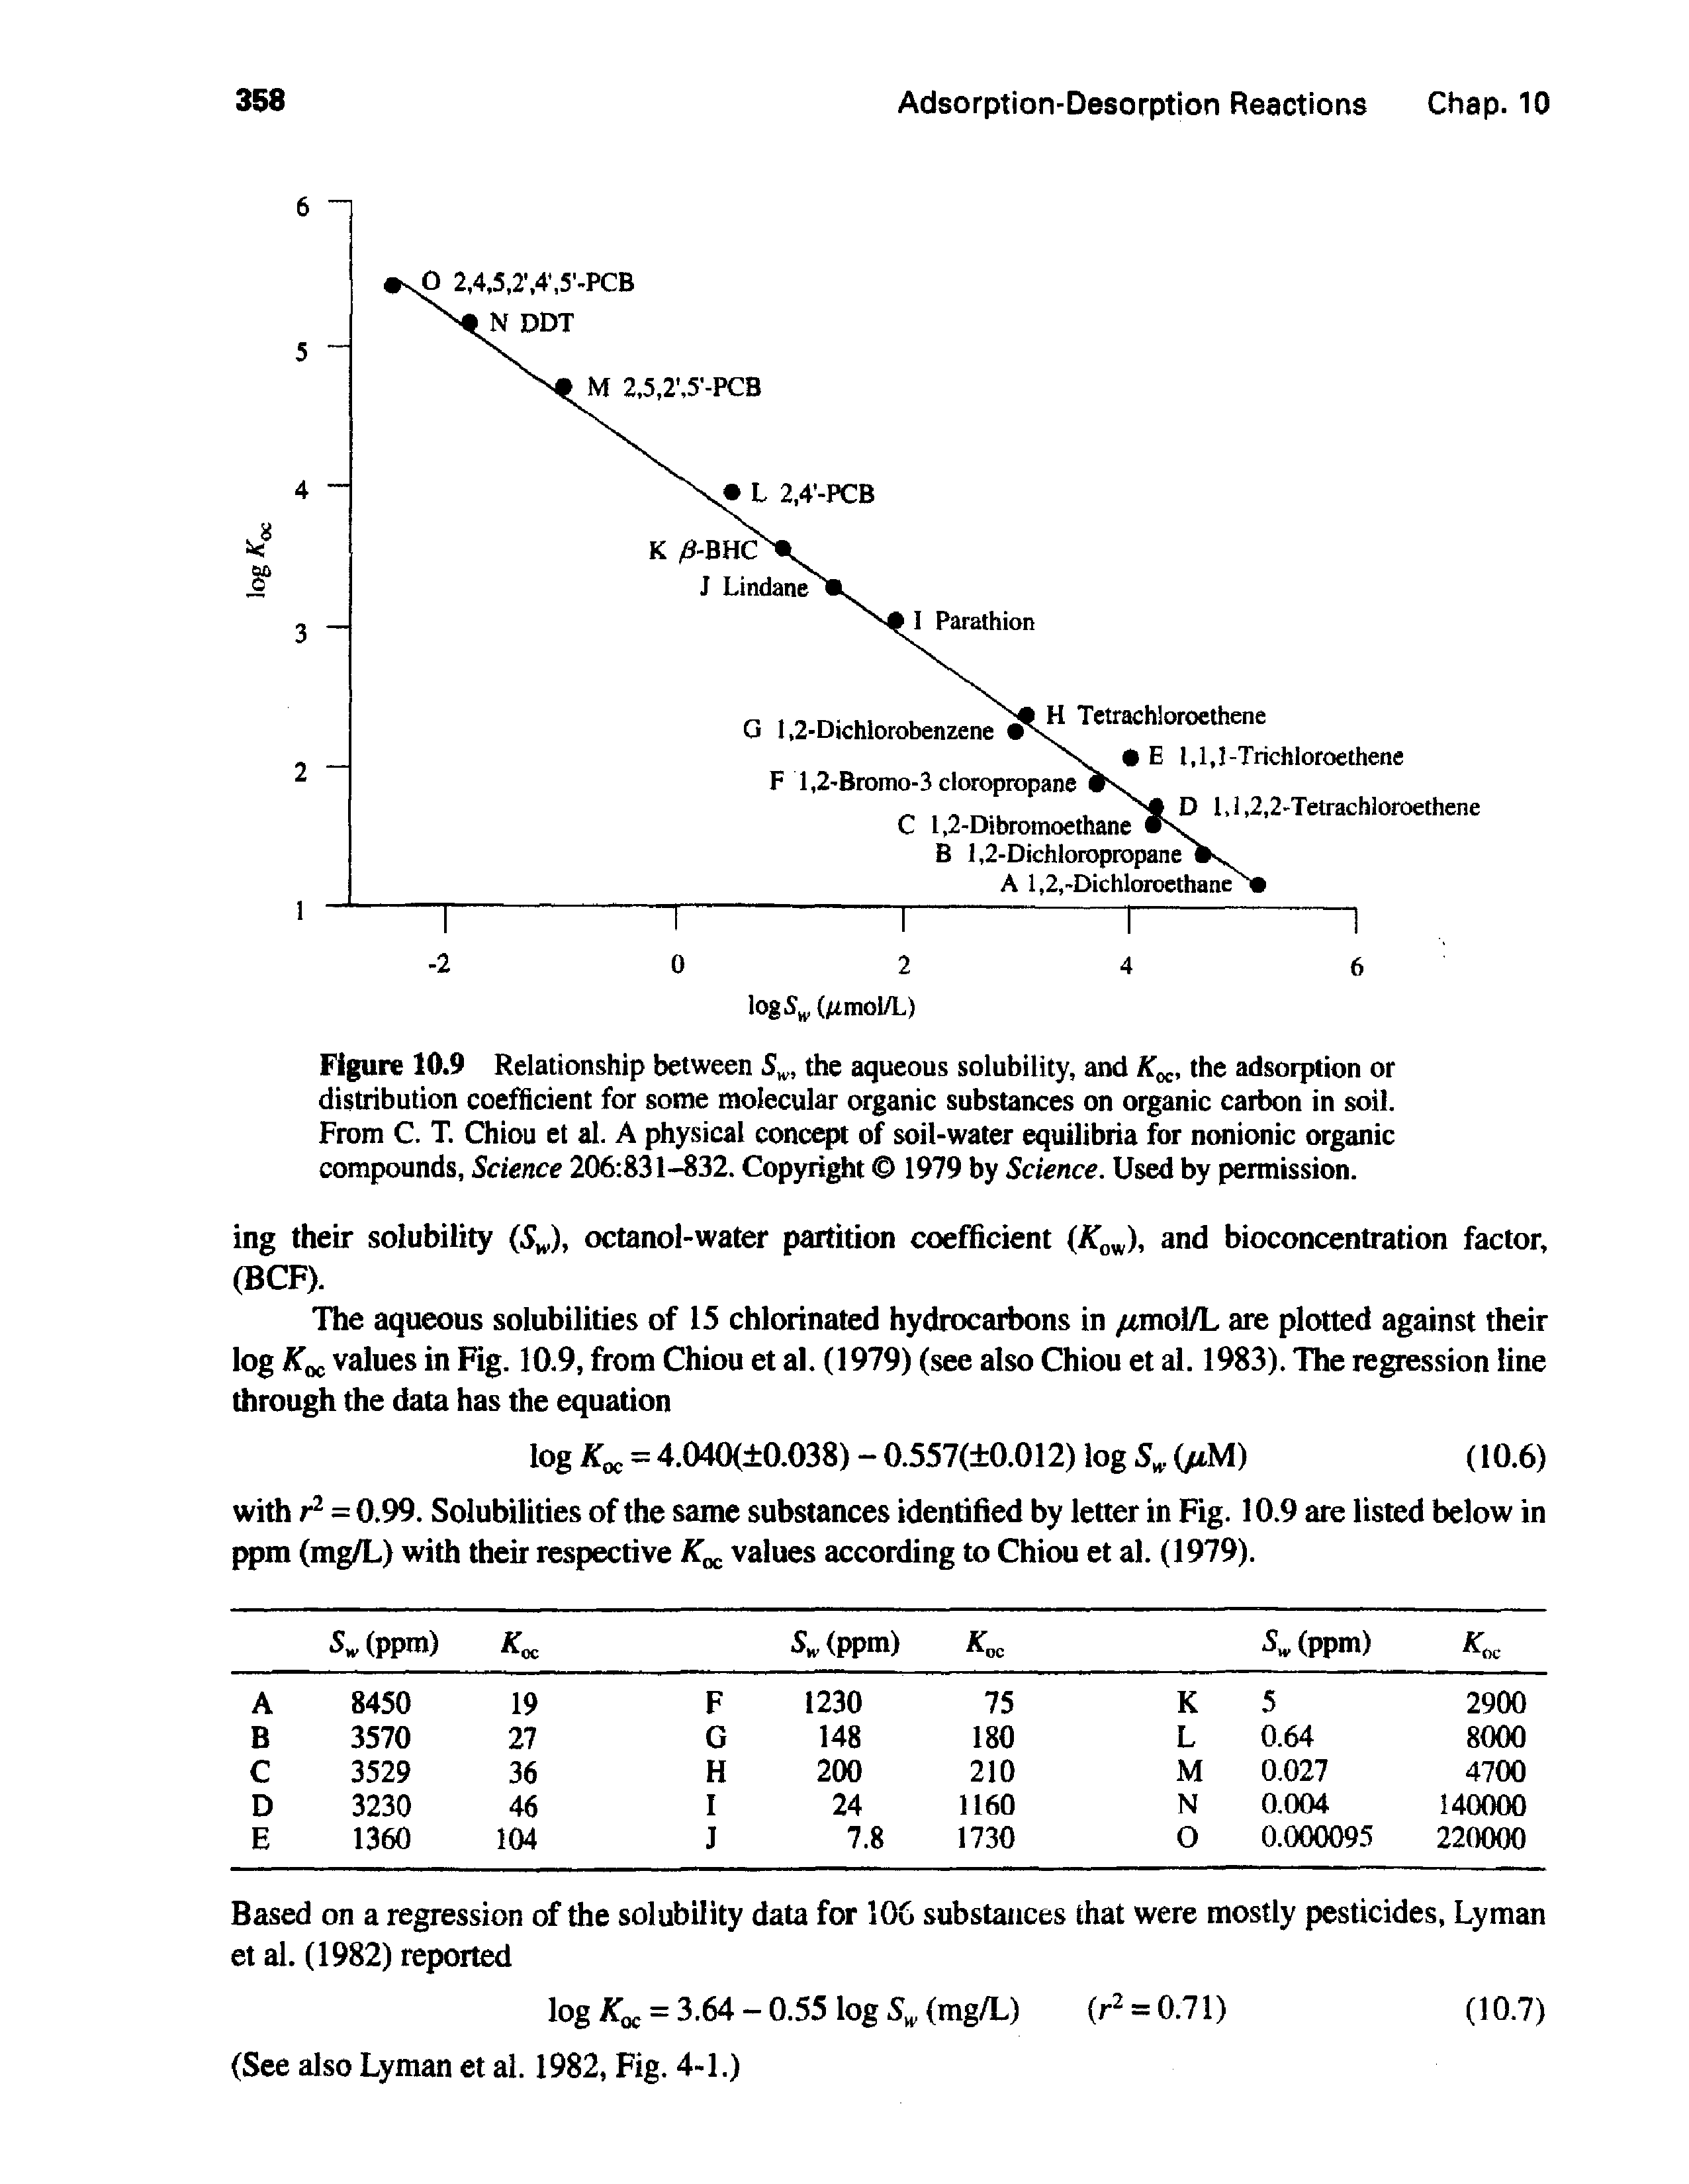 Figure 10.9 Relationship between S, the aqueous solubility, and K c, the adsorption or distribution coefficient for some molecular organic substances on organic carbon in soil.